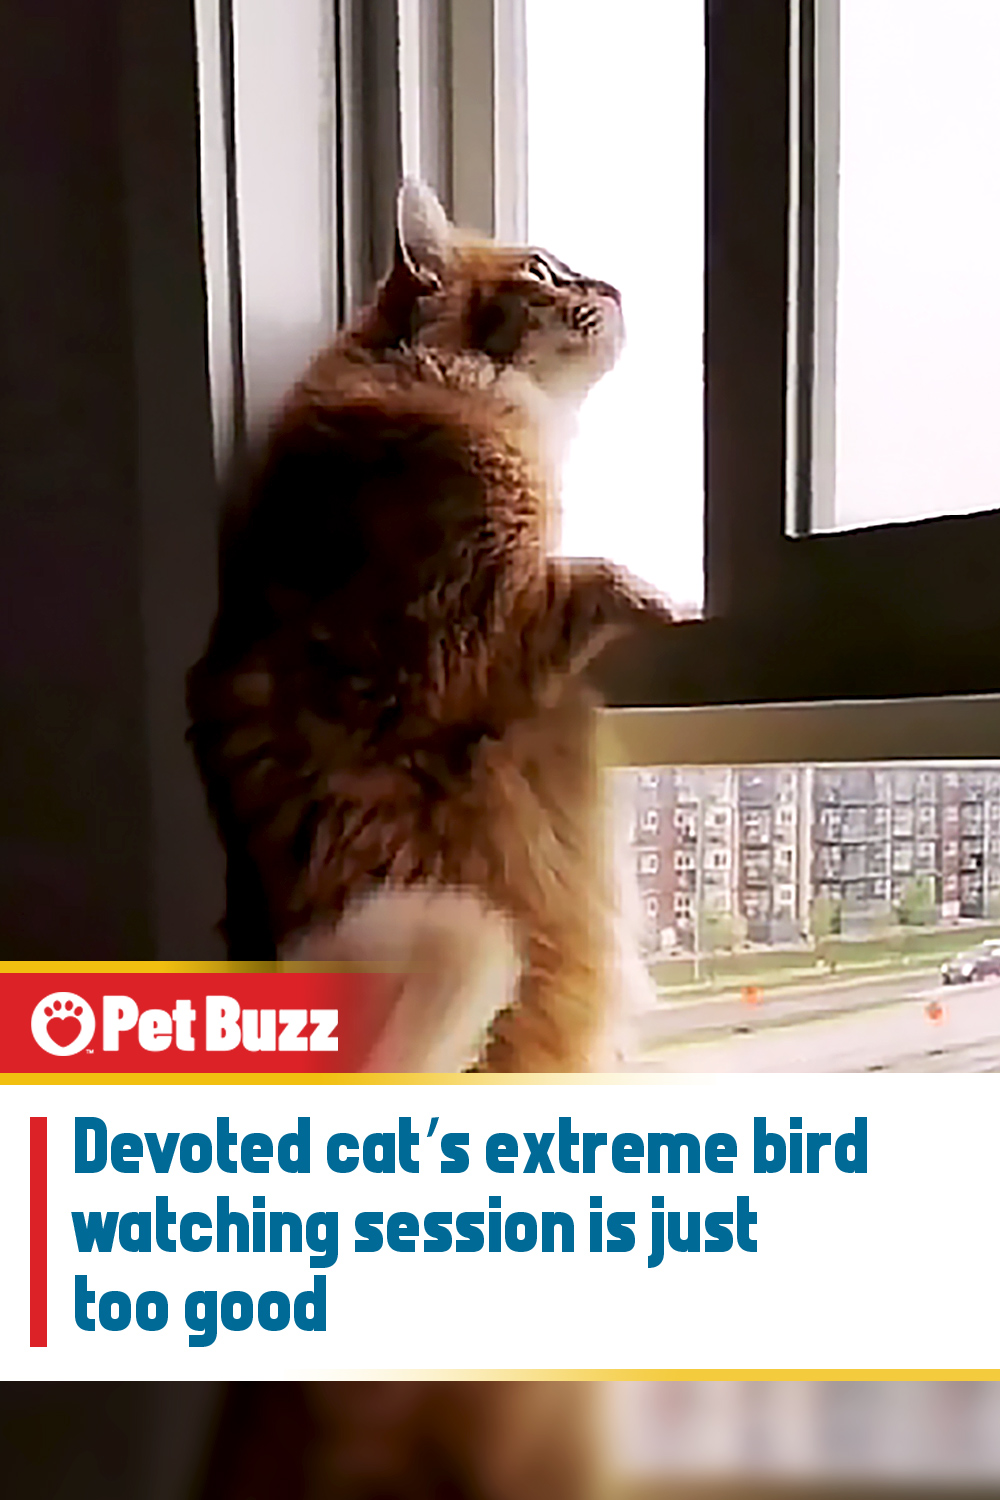 Devoted cat’s extreme bird watching session is just too good